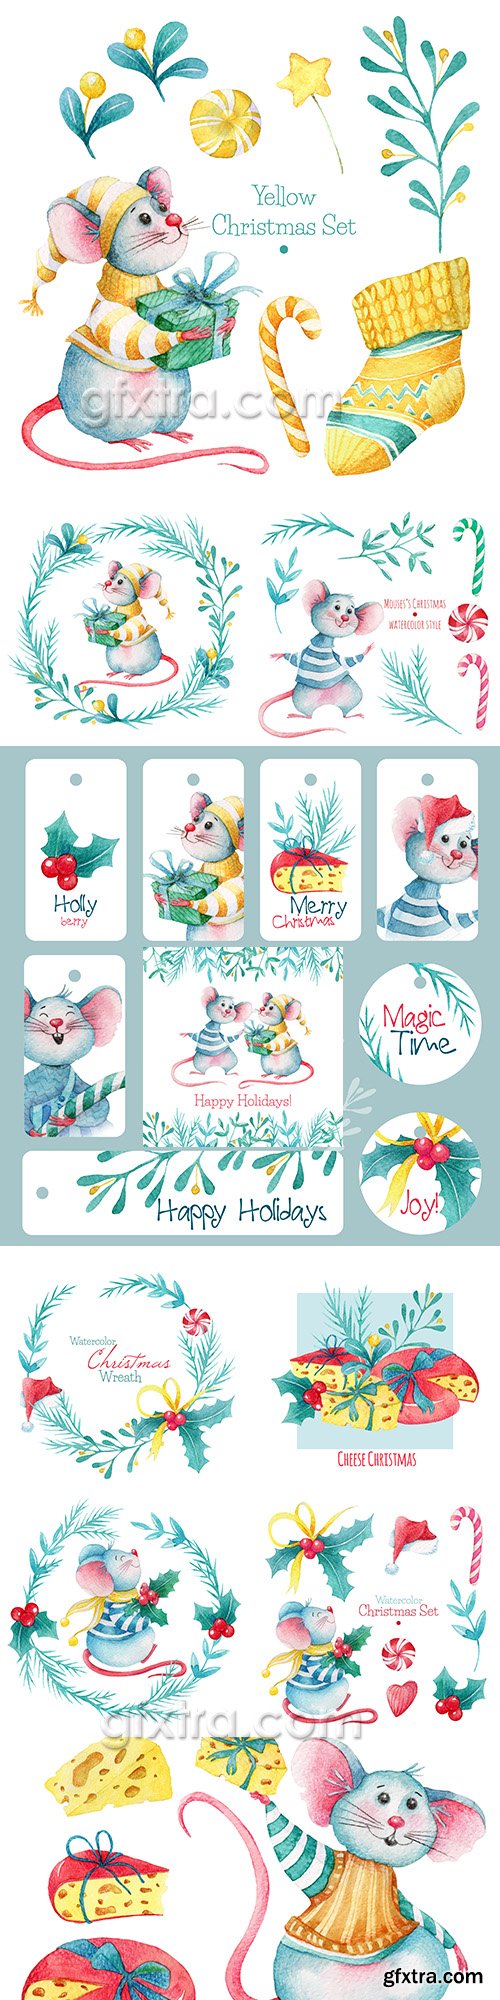 Mouse New Year symbol 2020 watercolor illustrations 2